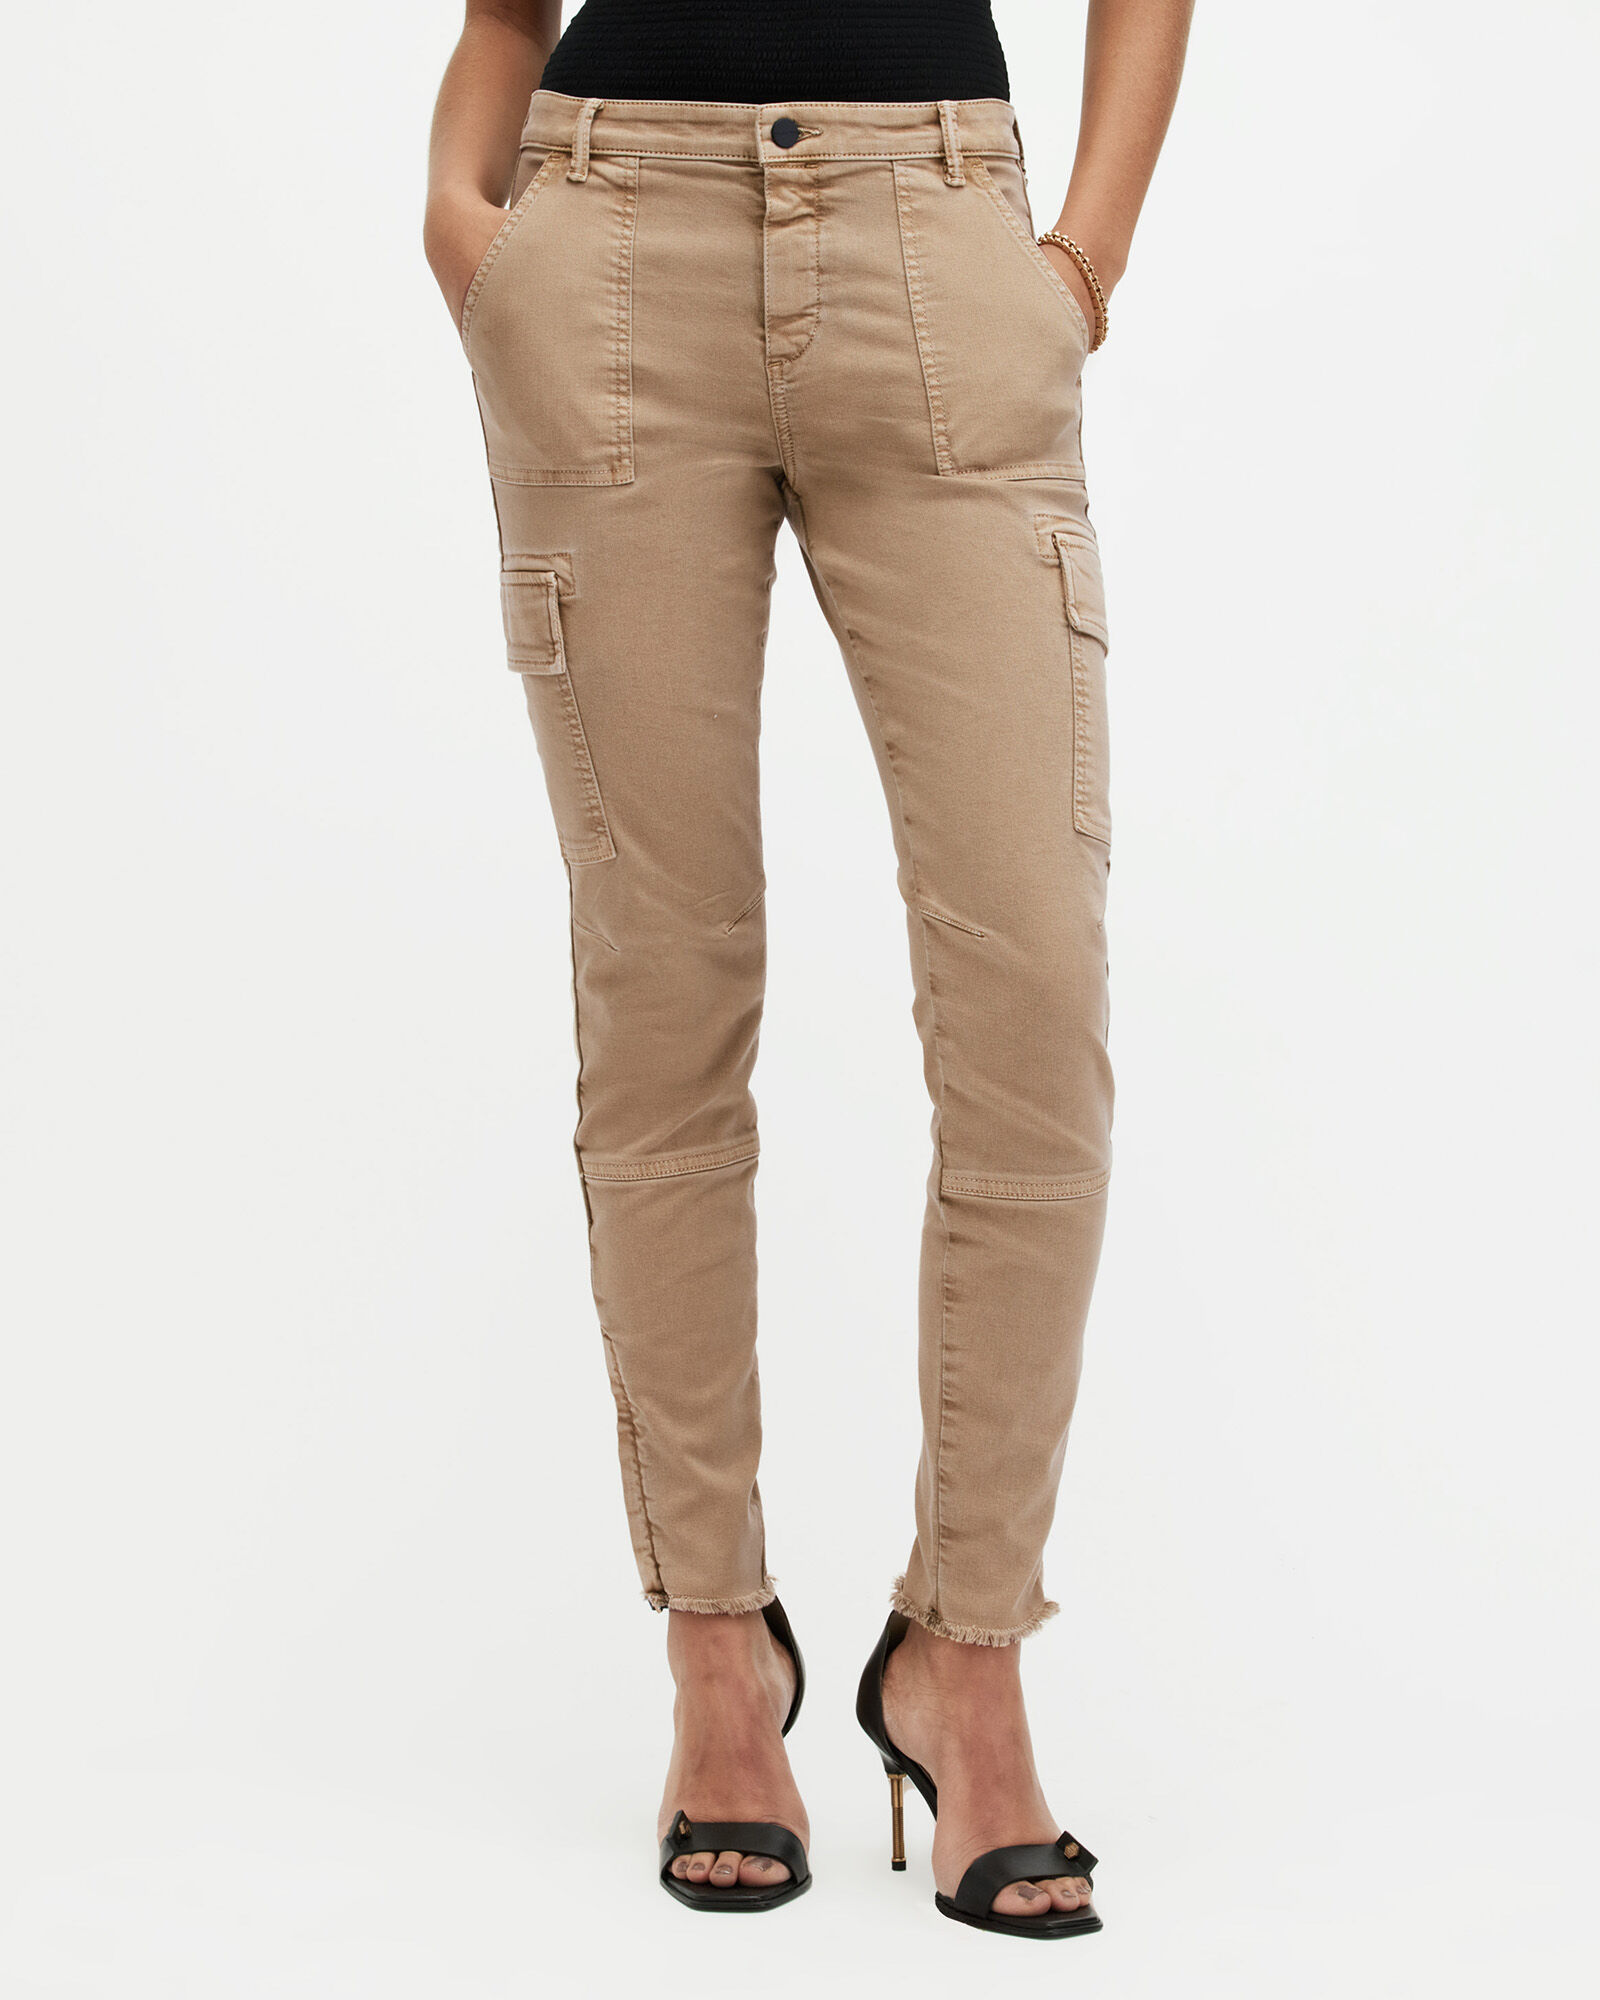 New Look Stone Wide Leg Cargo Trousers | very.co.uk